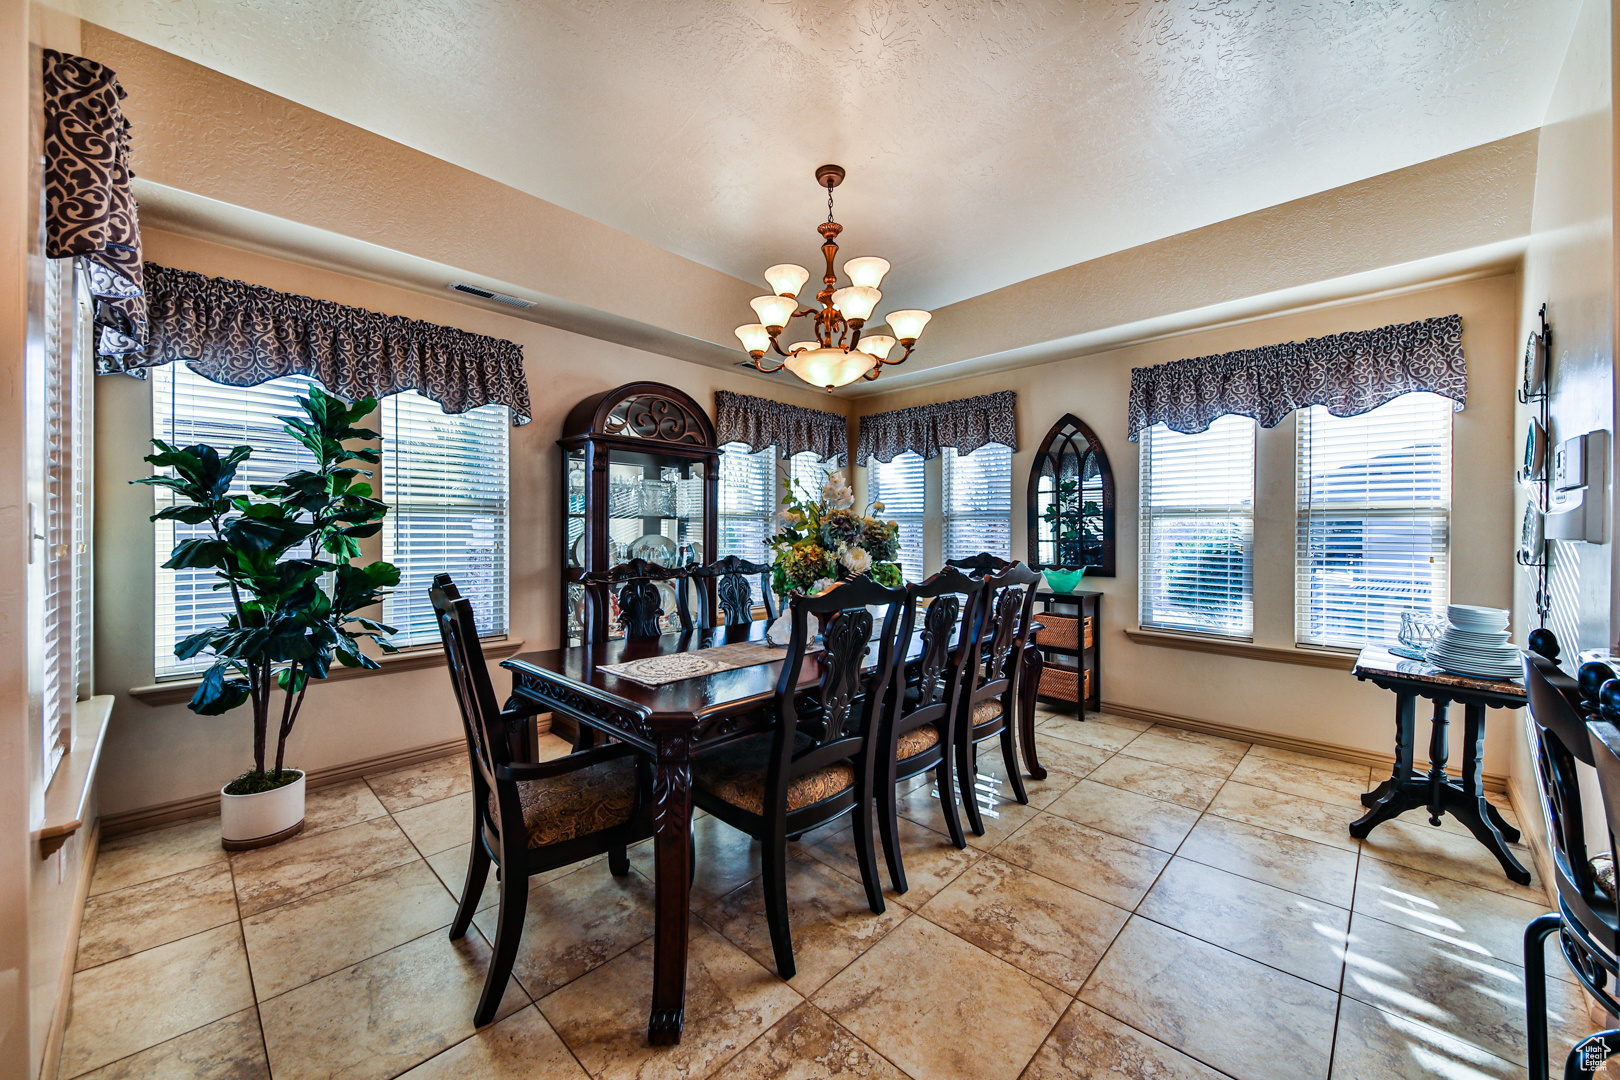 Dining room featuring plenty of natural light, a notable chandelier, and light tile floors